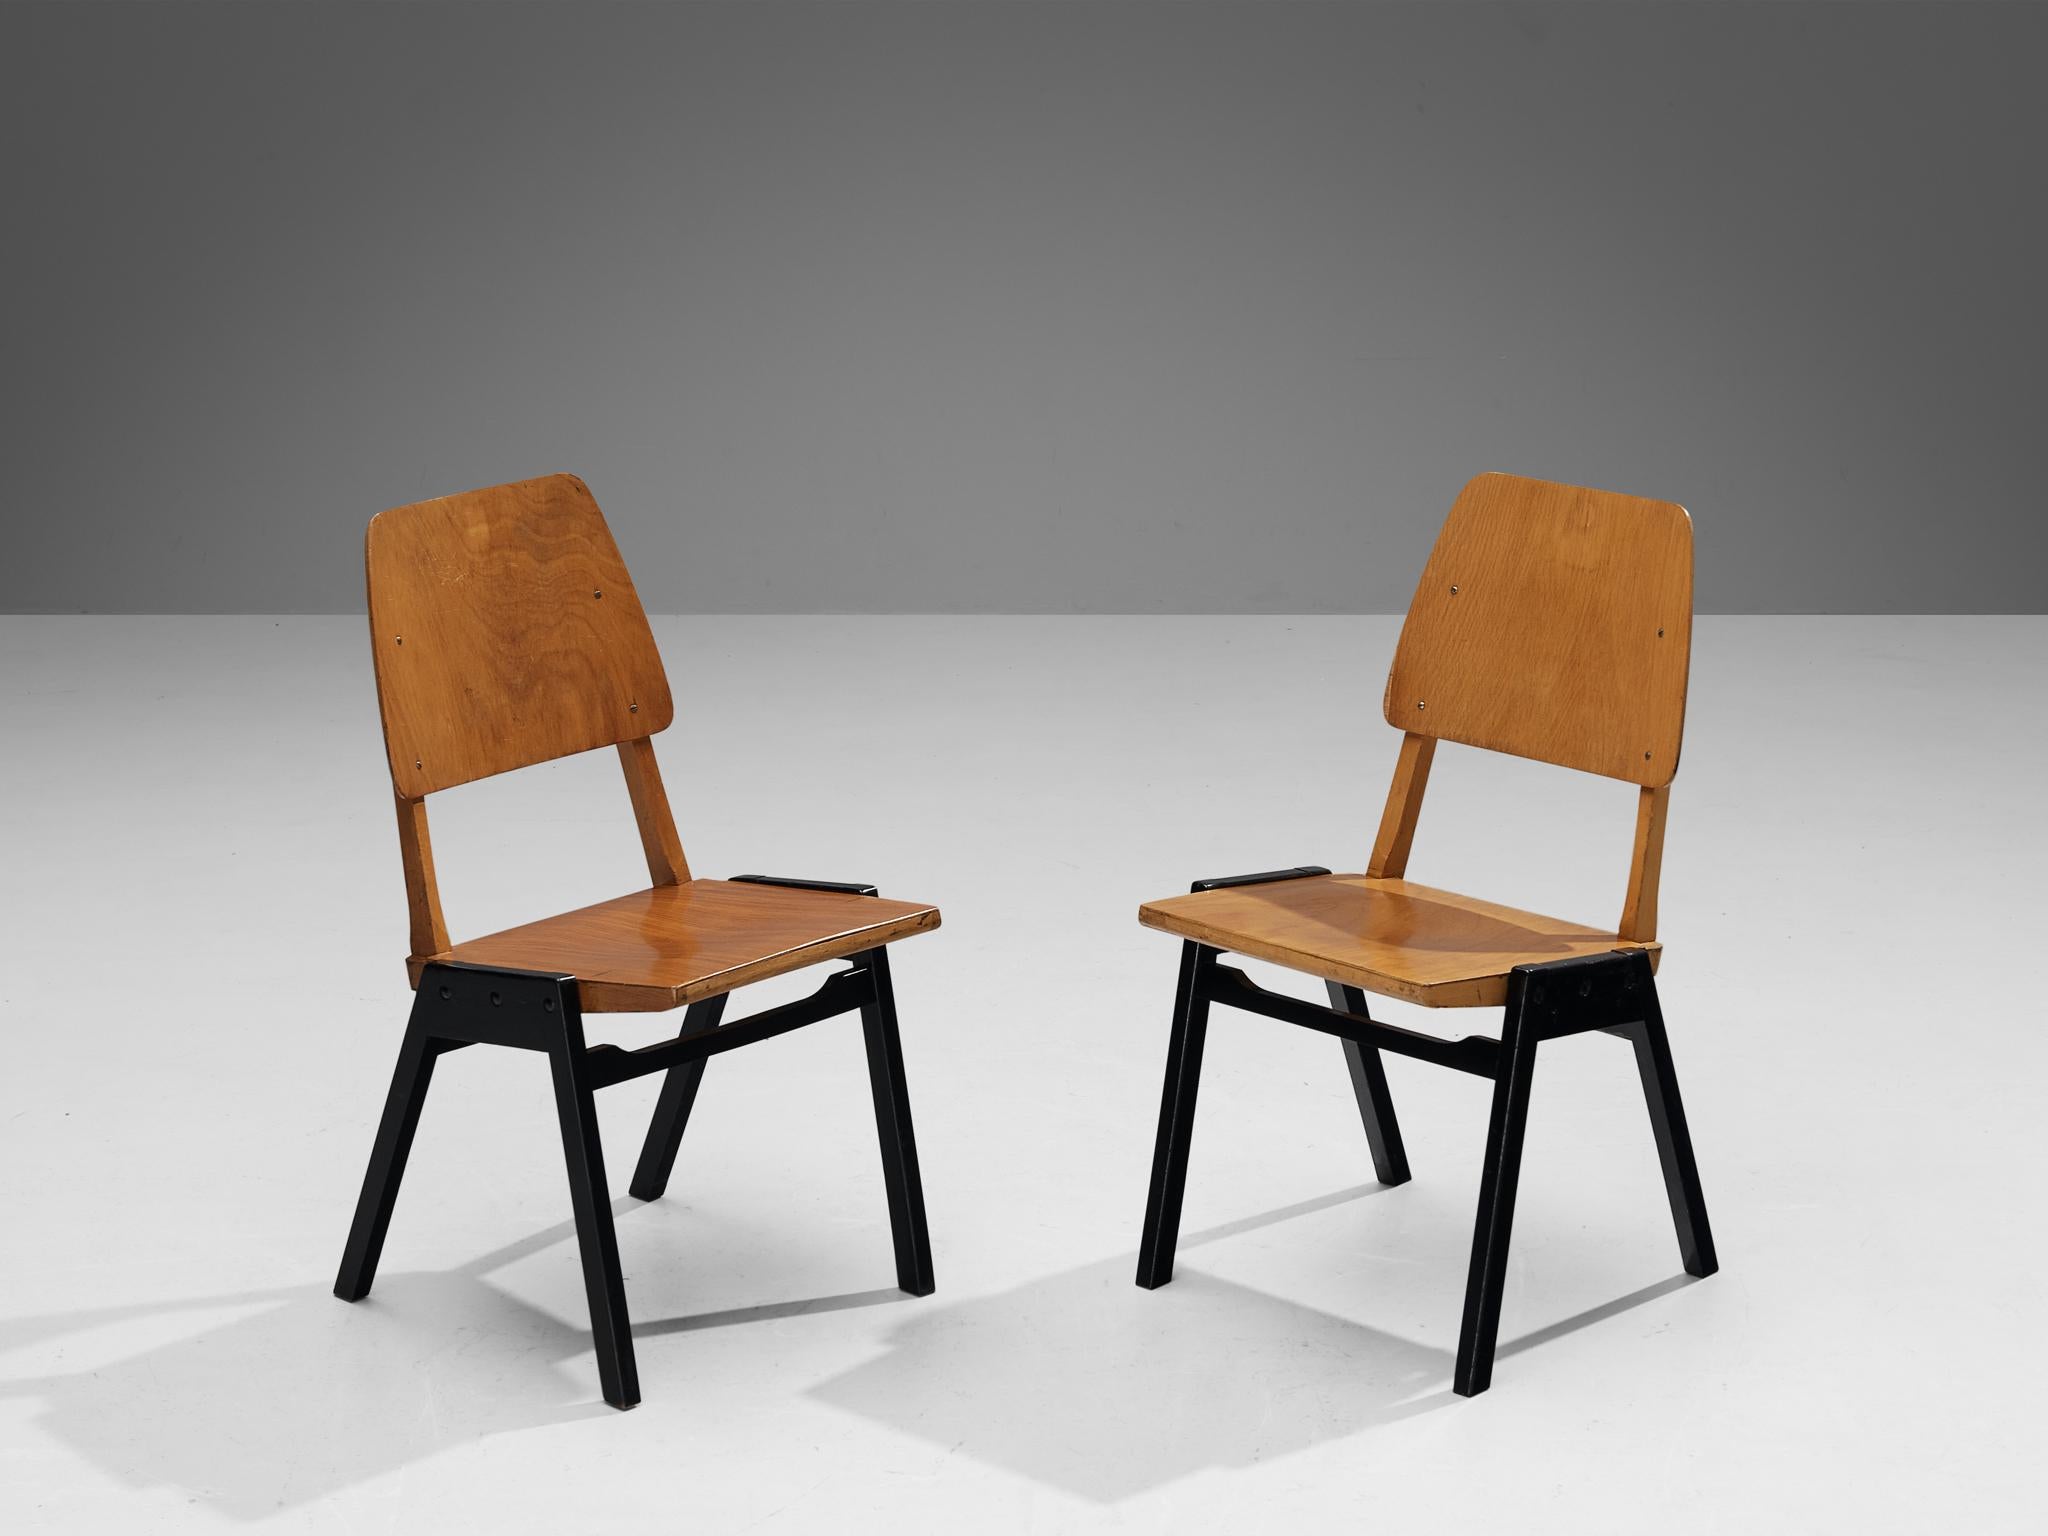 Roland Rainer, dining chairs, stained beech, lacquered beech, Austria, 1950s

These dining chairs have a minimalistic design, distinguished by an open construction style with emphasis on constructive details. The combination of the blond wood with